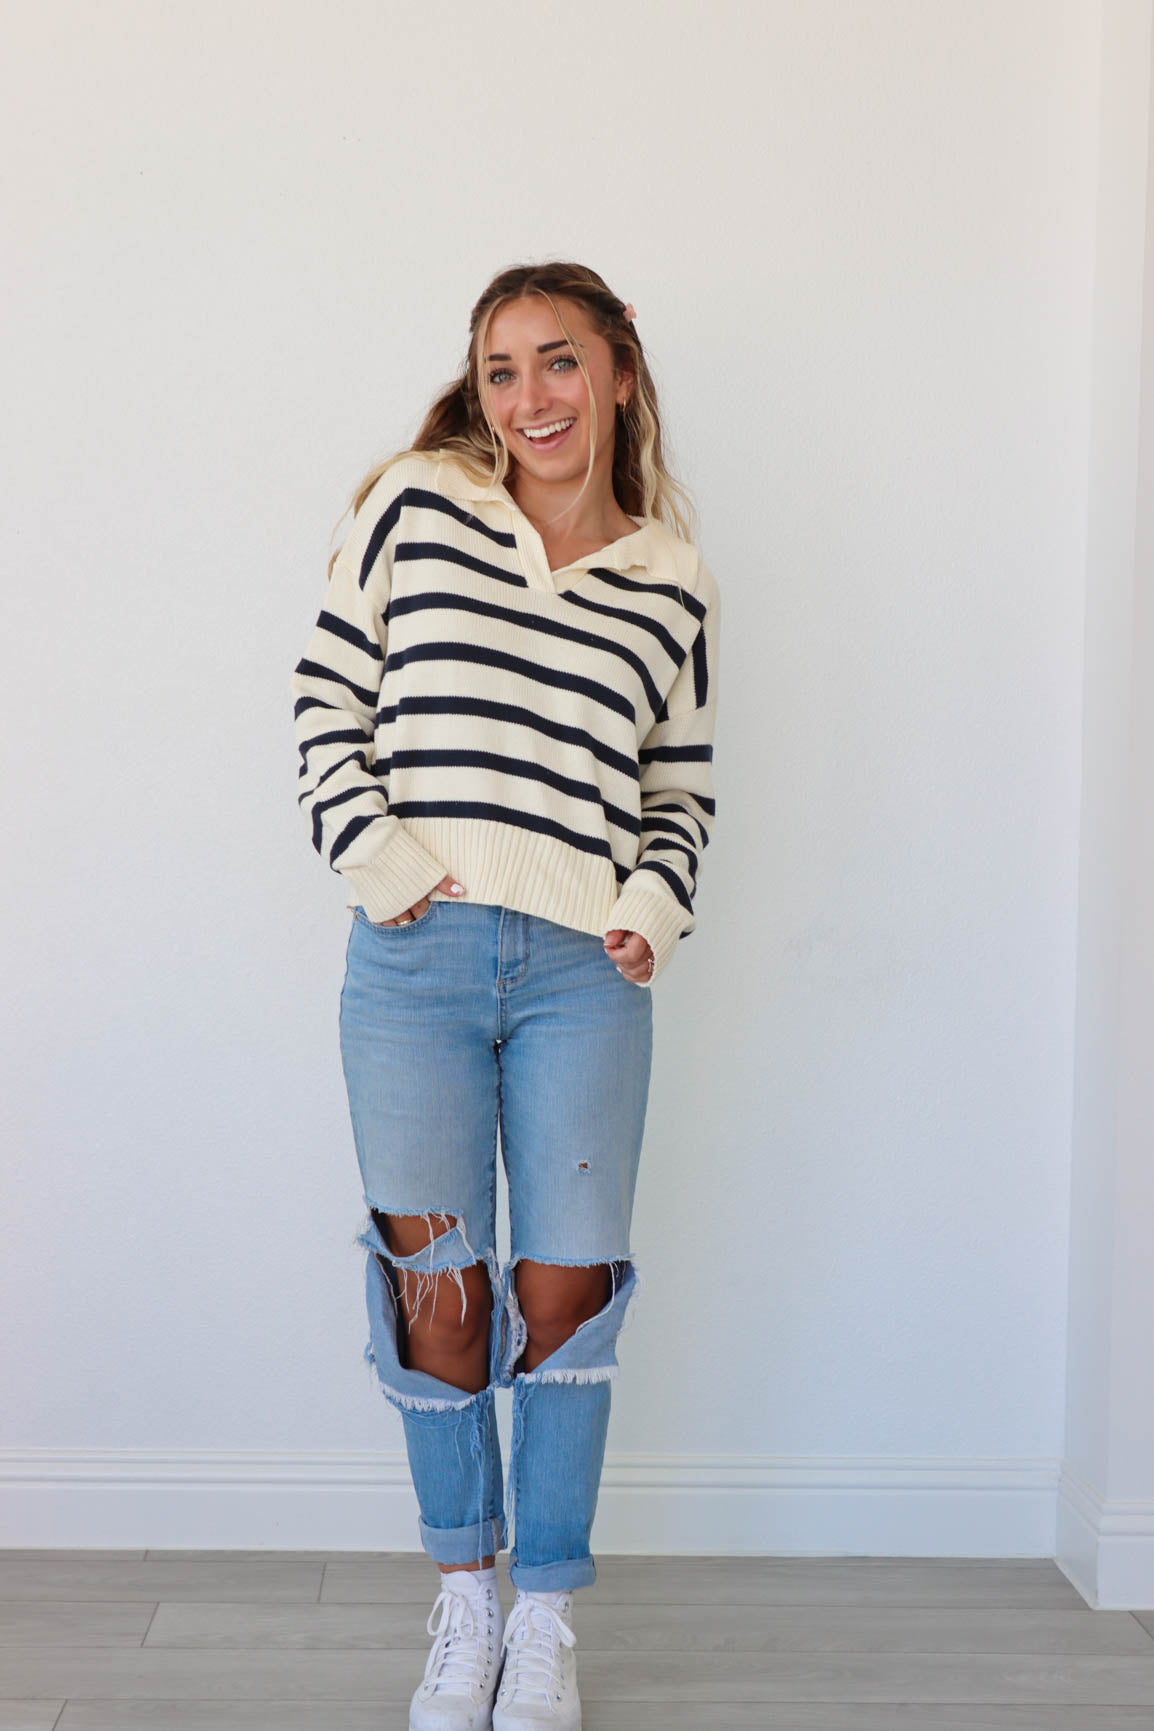 girl wearing knit striped pullover